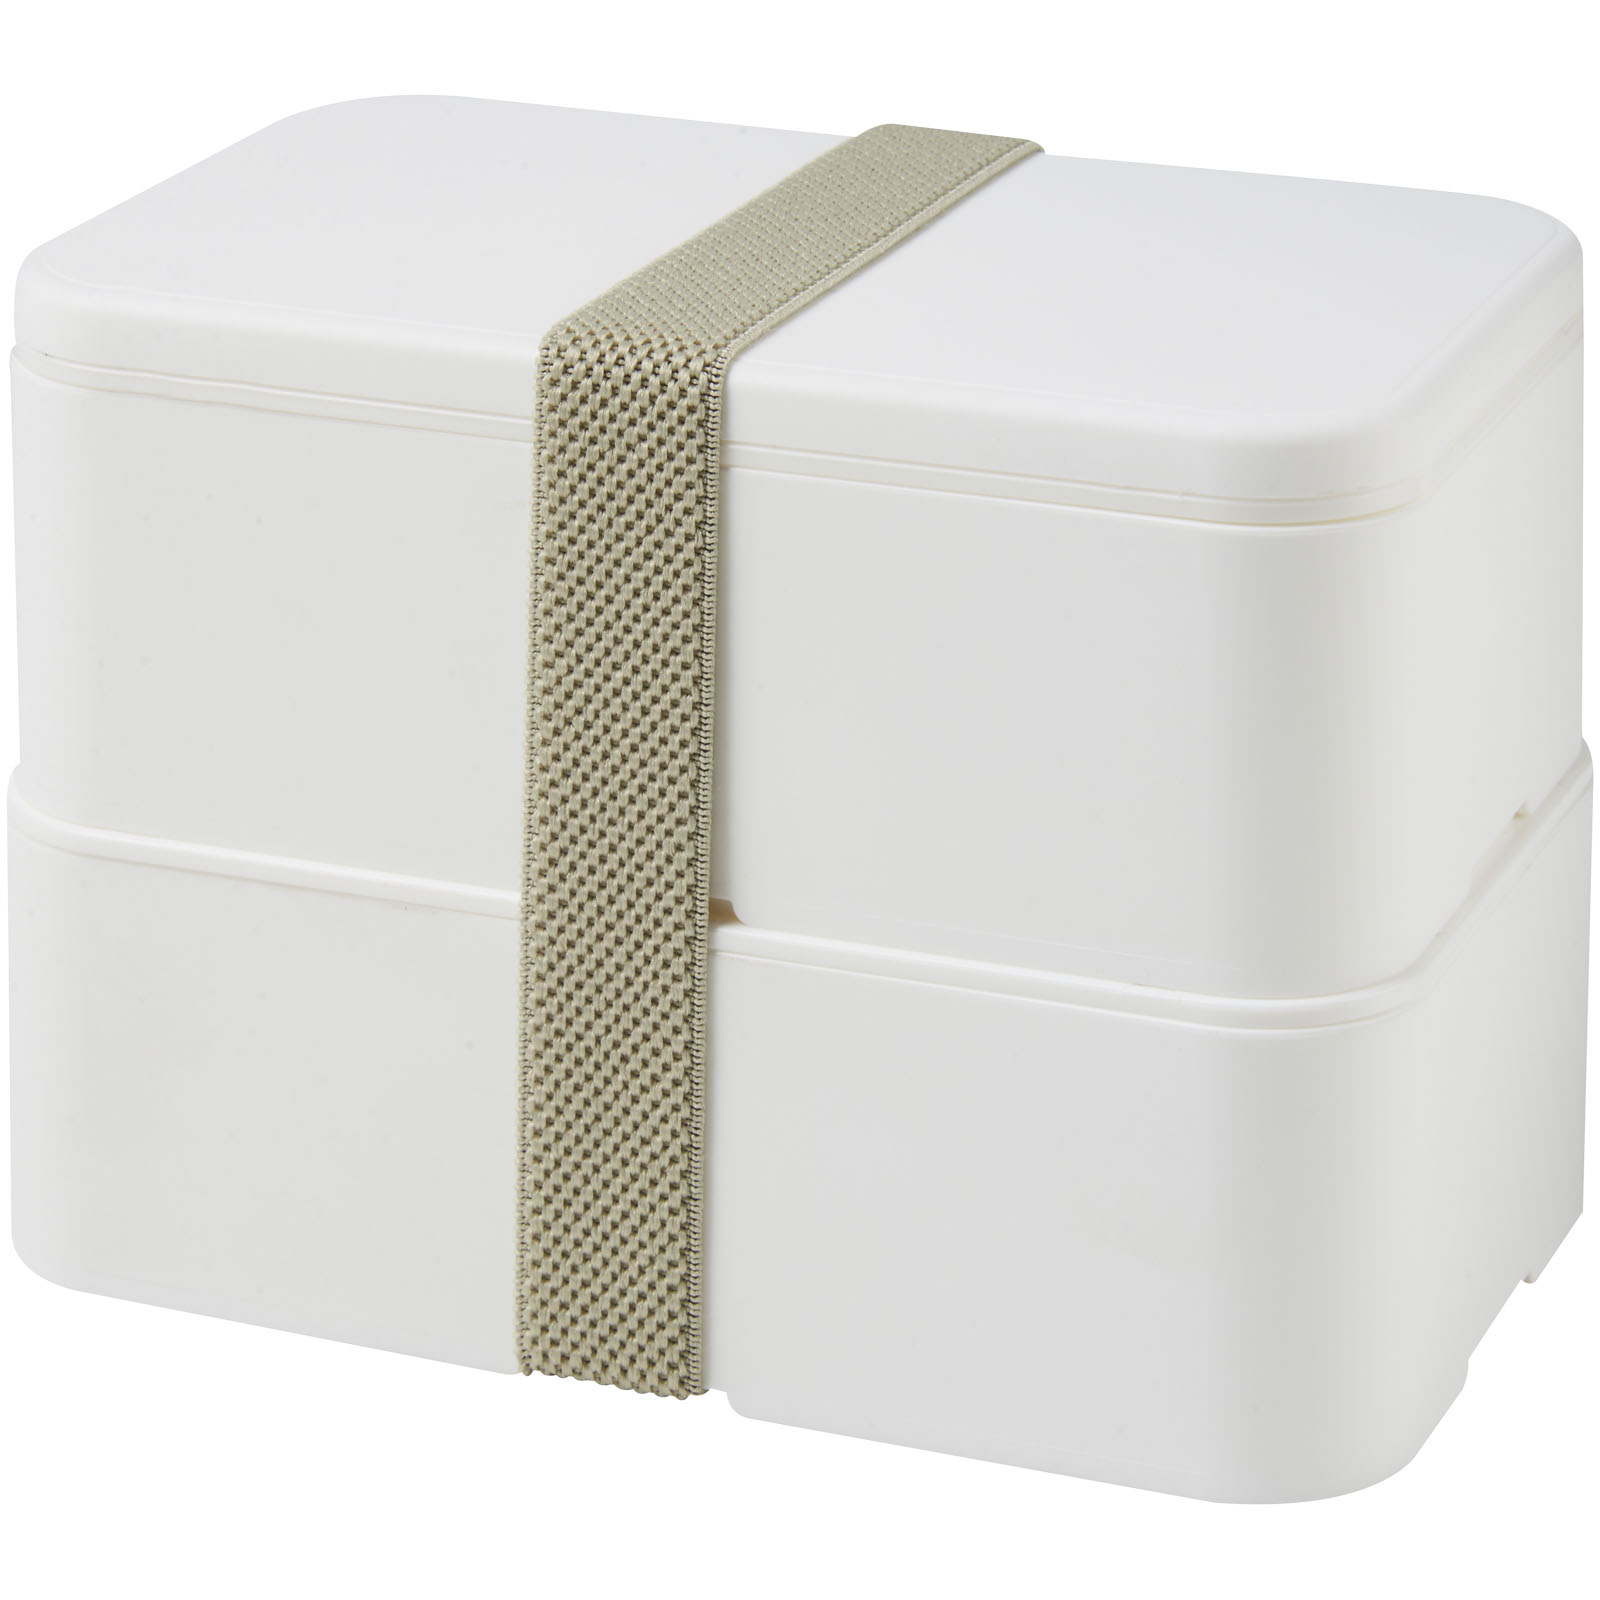 Lunch Boxes - MIYO double layer lunch box